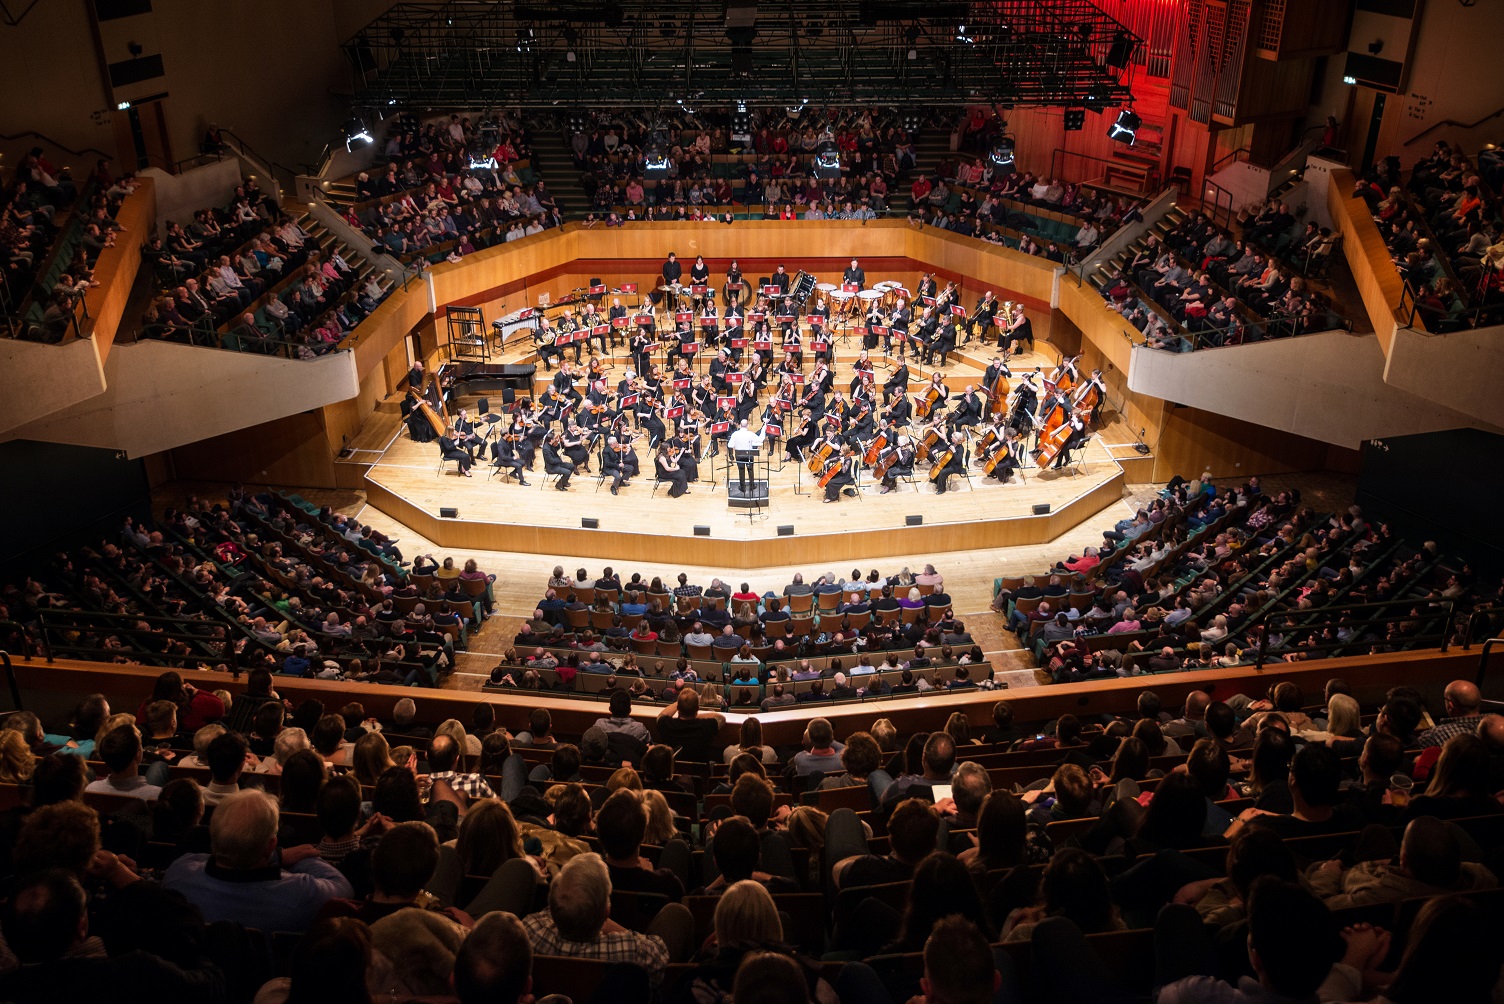 a picture of St. David's Hall, Cardiff